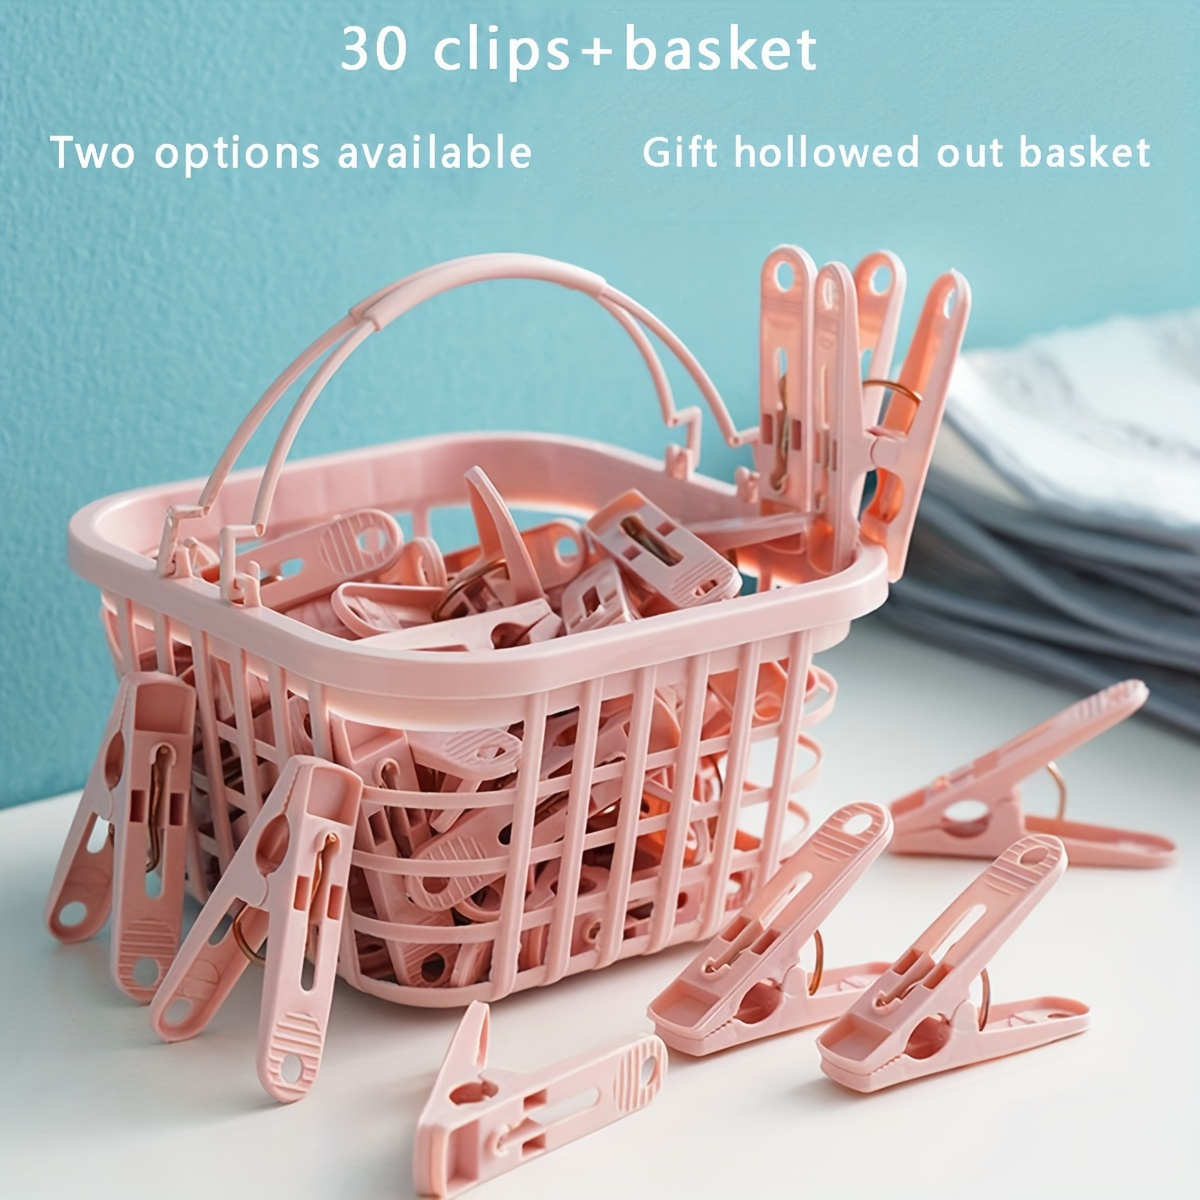 

Plastic Laundry Clothespins Set With Basket, 30 Pack, Windproof, Space-efficient, Multi-purpose Clothes Pegs For Drying Clothing & Accessories